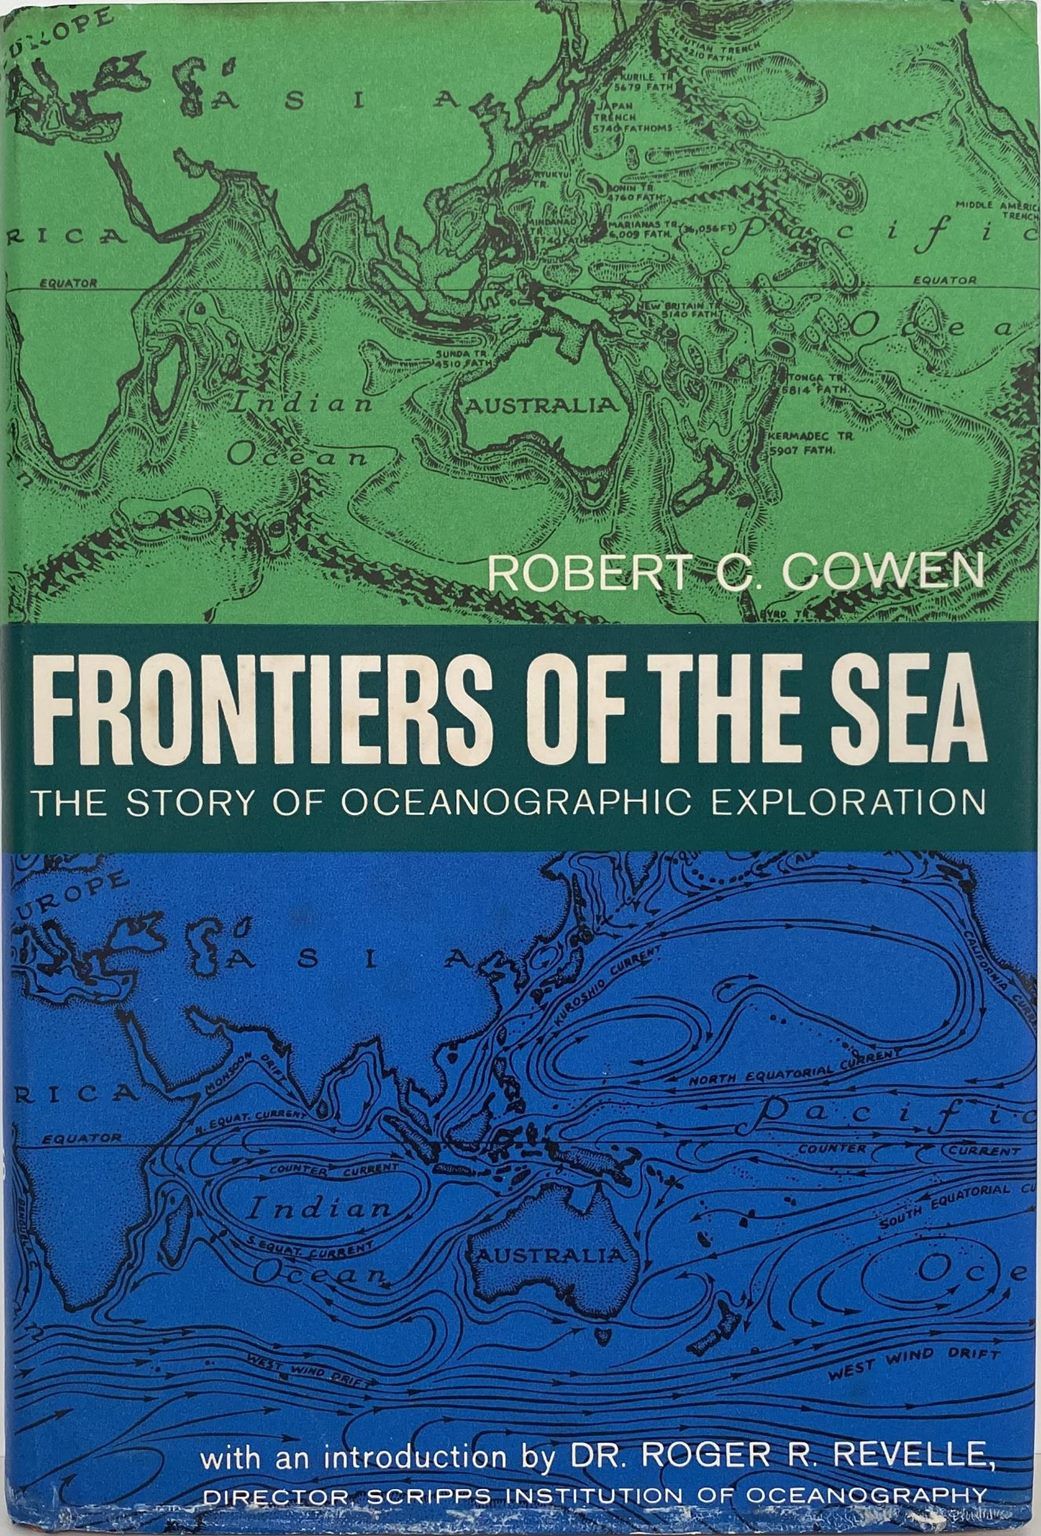 FRONTIERS OF THE SEA: The Story of the Oceanographic Exploration